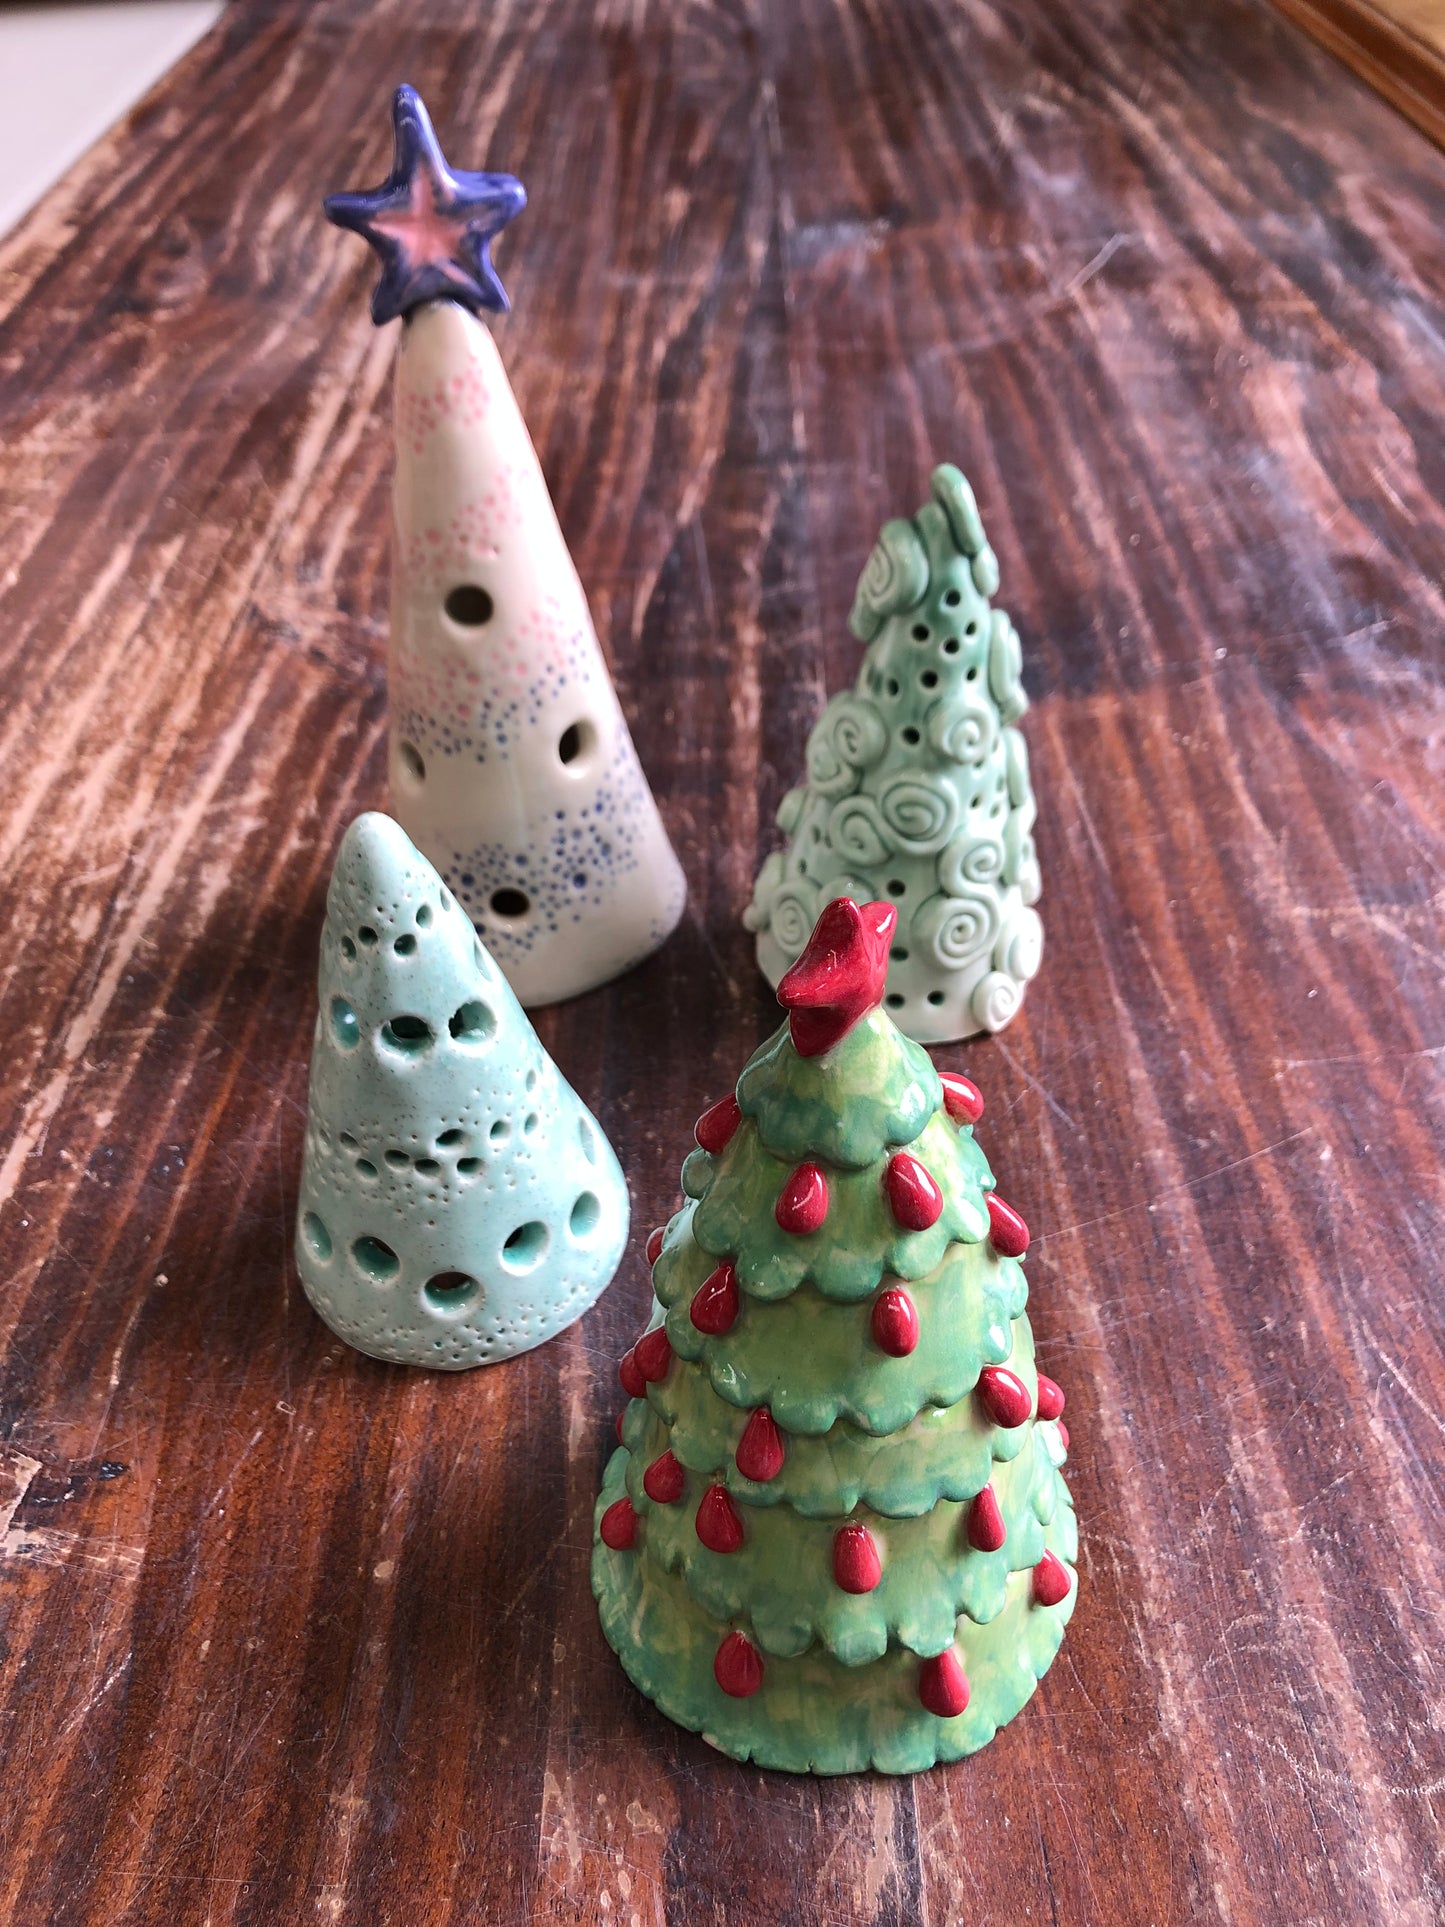 October 28th 1-3pm - Christmas Workshop! Create your own Christmas Tree Tea light